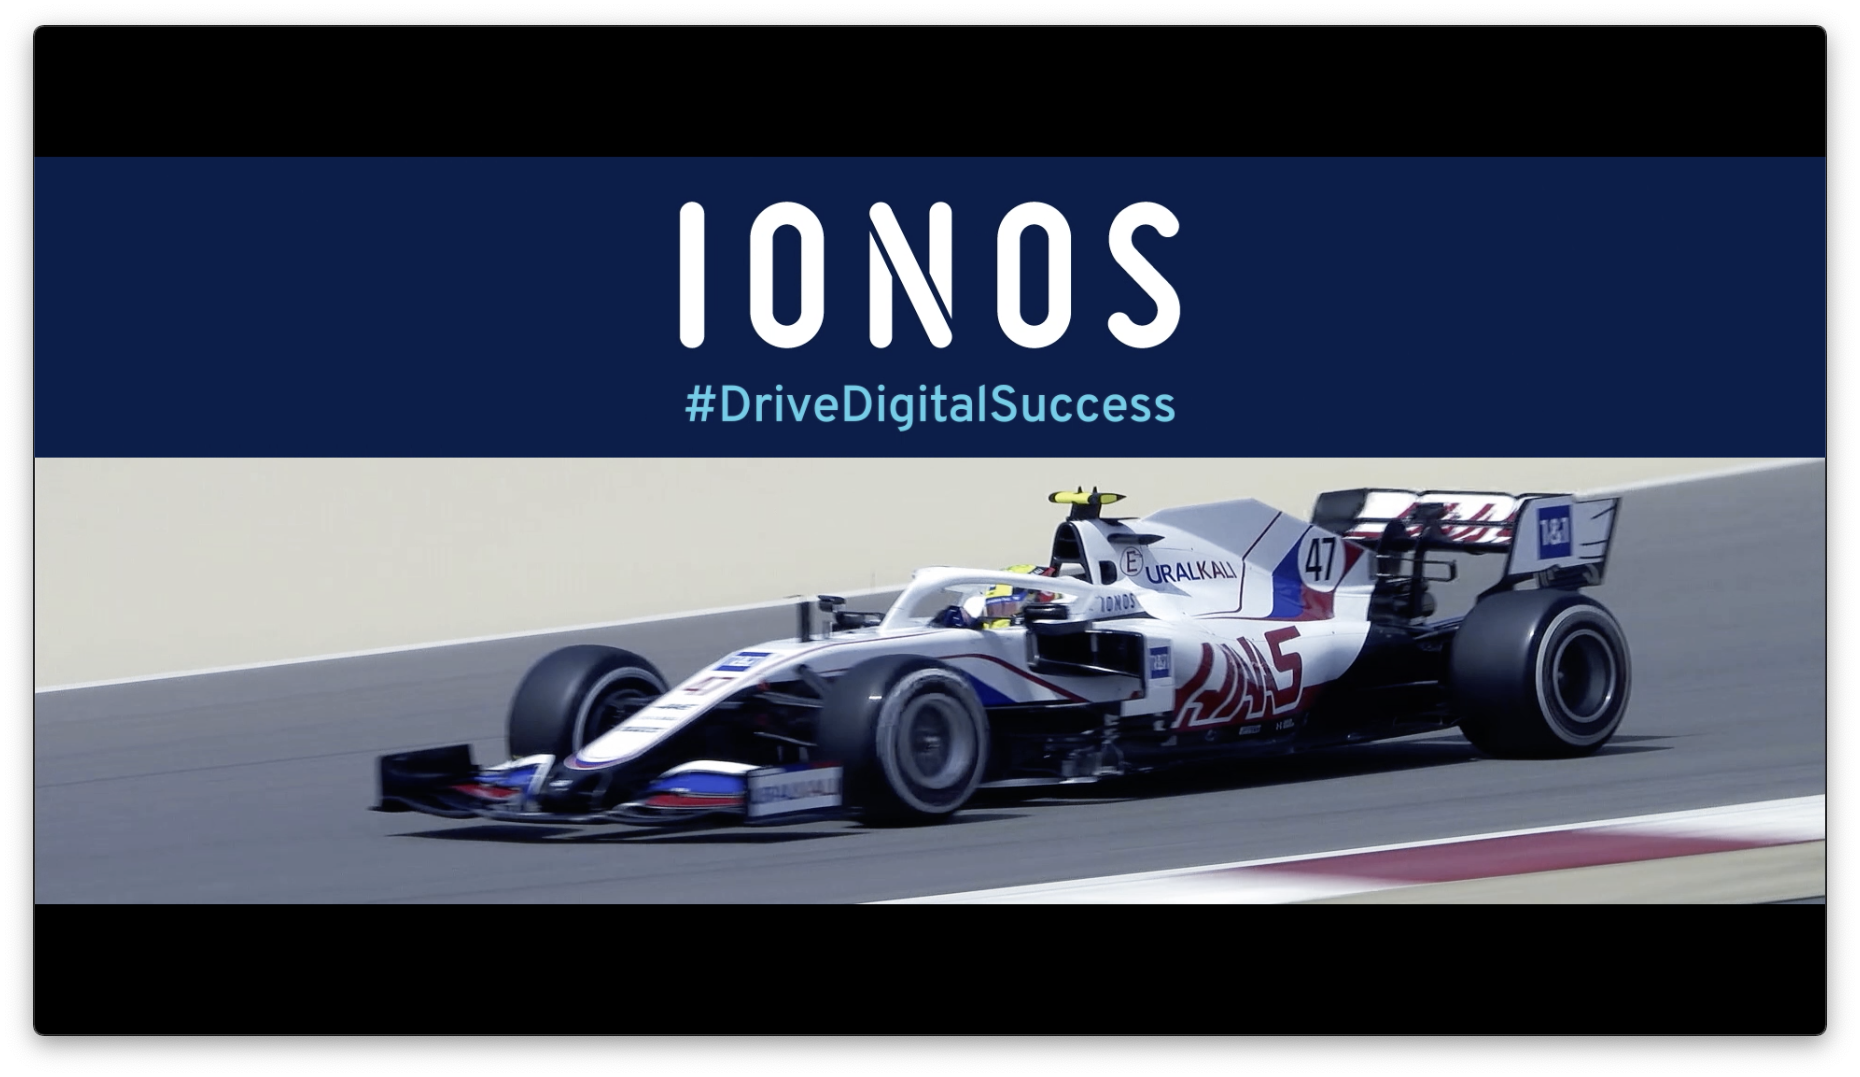 IONOS Drivedigitalsuccess video preview image with race car